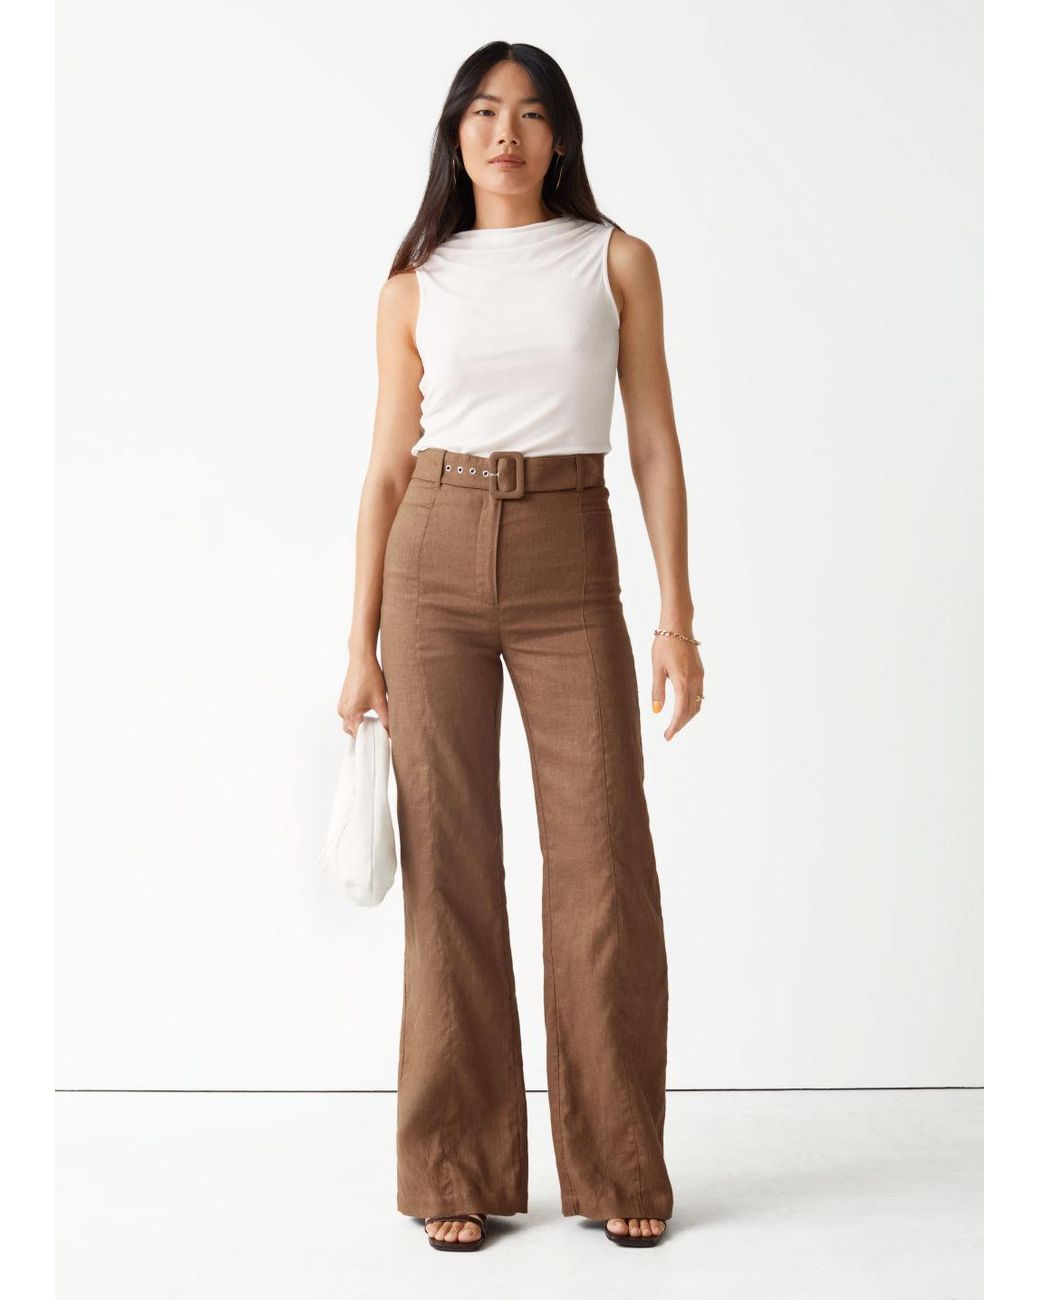 & Other Stories Belted Stretch Kick Flare Trousers in Beige Natural Womens Clothing Trousers Slacks and Chinos Capri and cropped trousers 